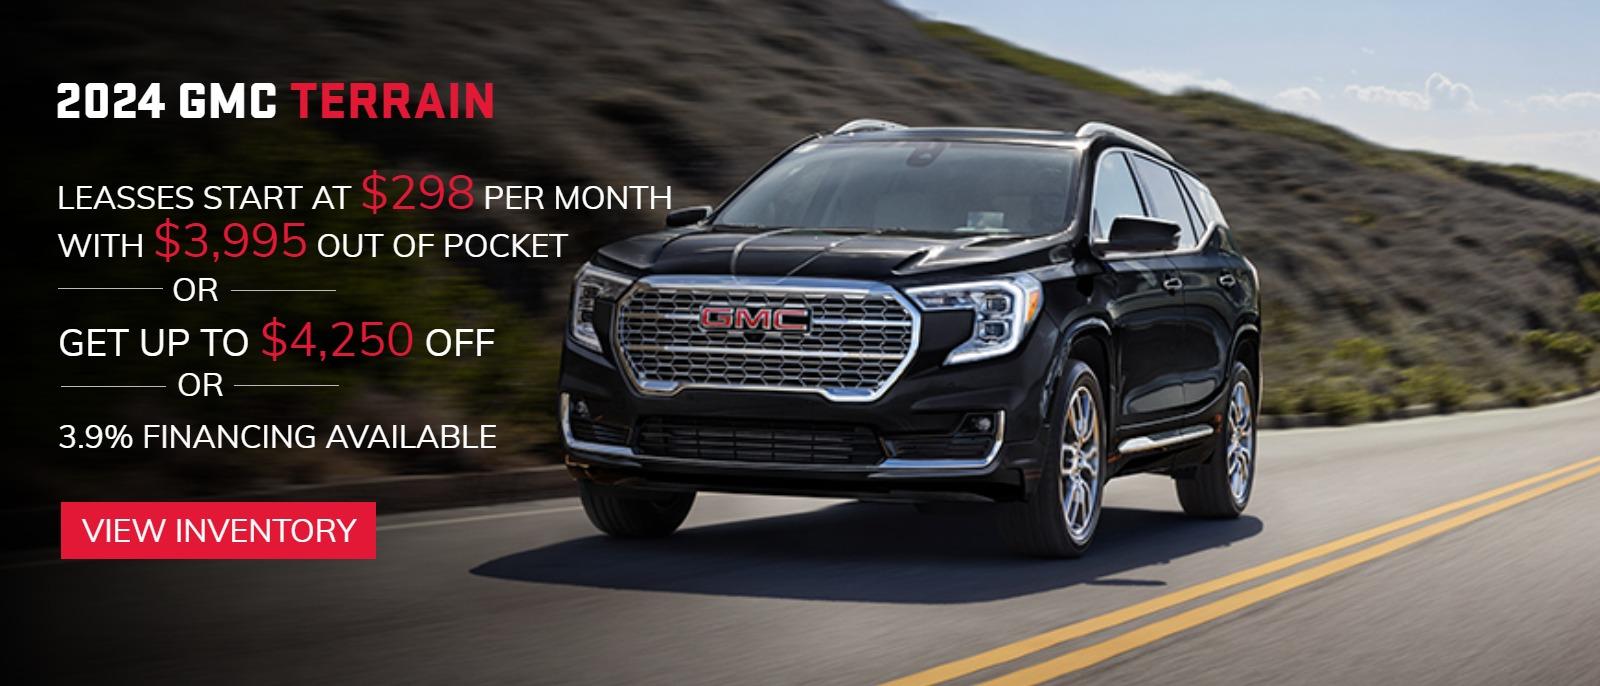 2024 GMC TERRAIN
LEASSES START AT $298 PER MONTH WITH $3995 OUT OF POCKET 
GET UP TO $4250 OFF 
3.9% FINANCING AVAILABLE